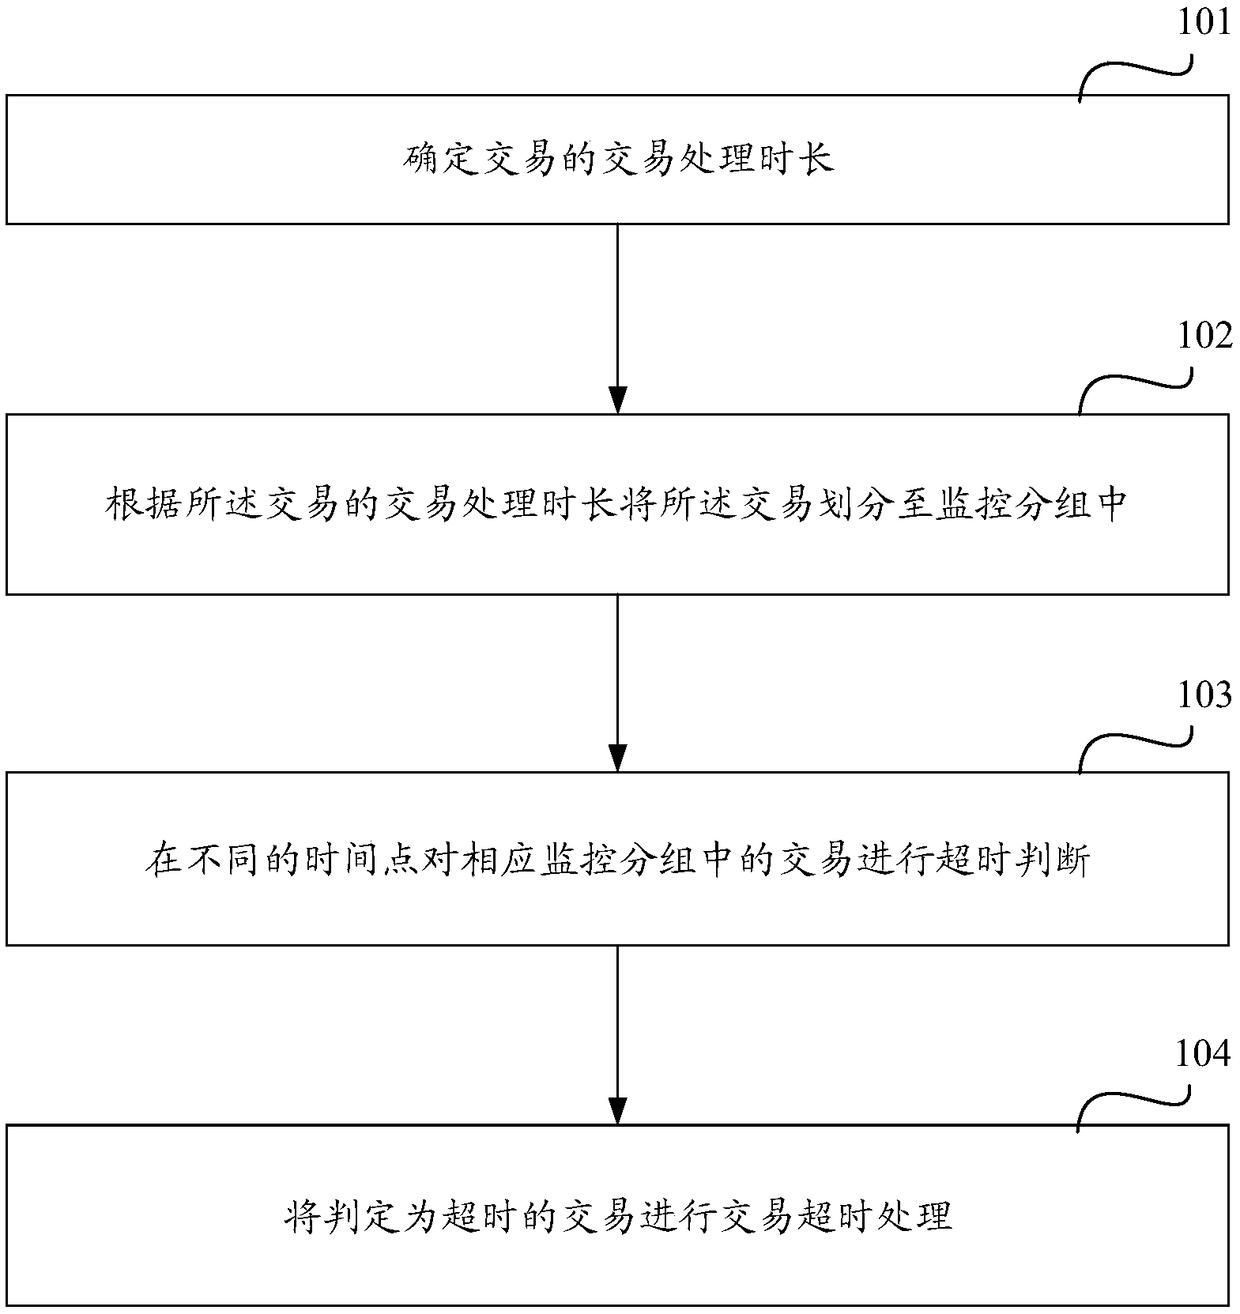 Method and apparatus for monitoring transaction timeout